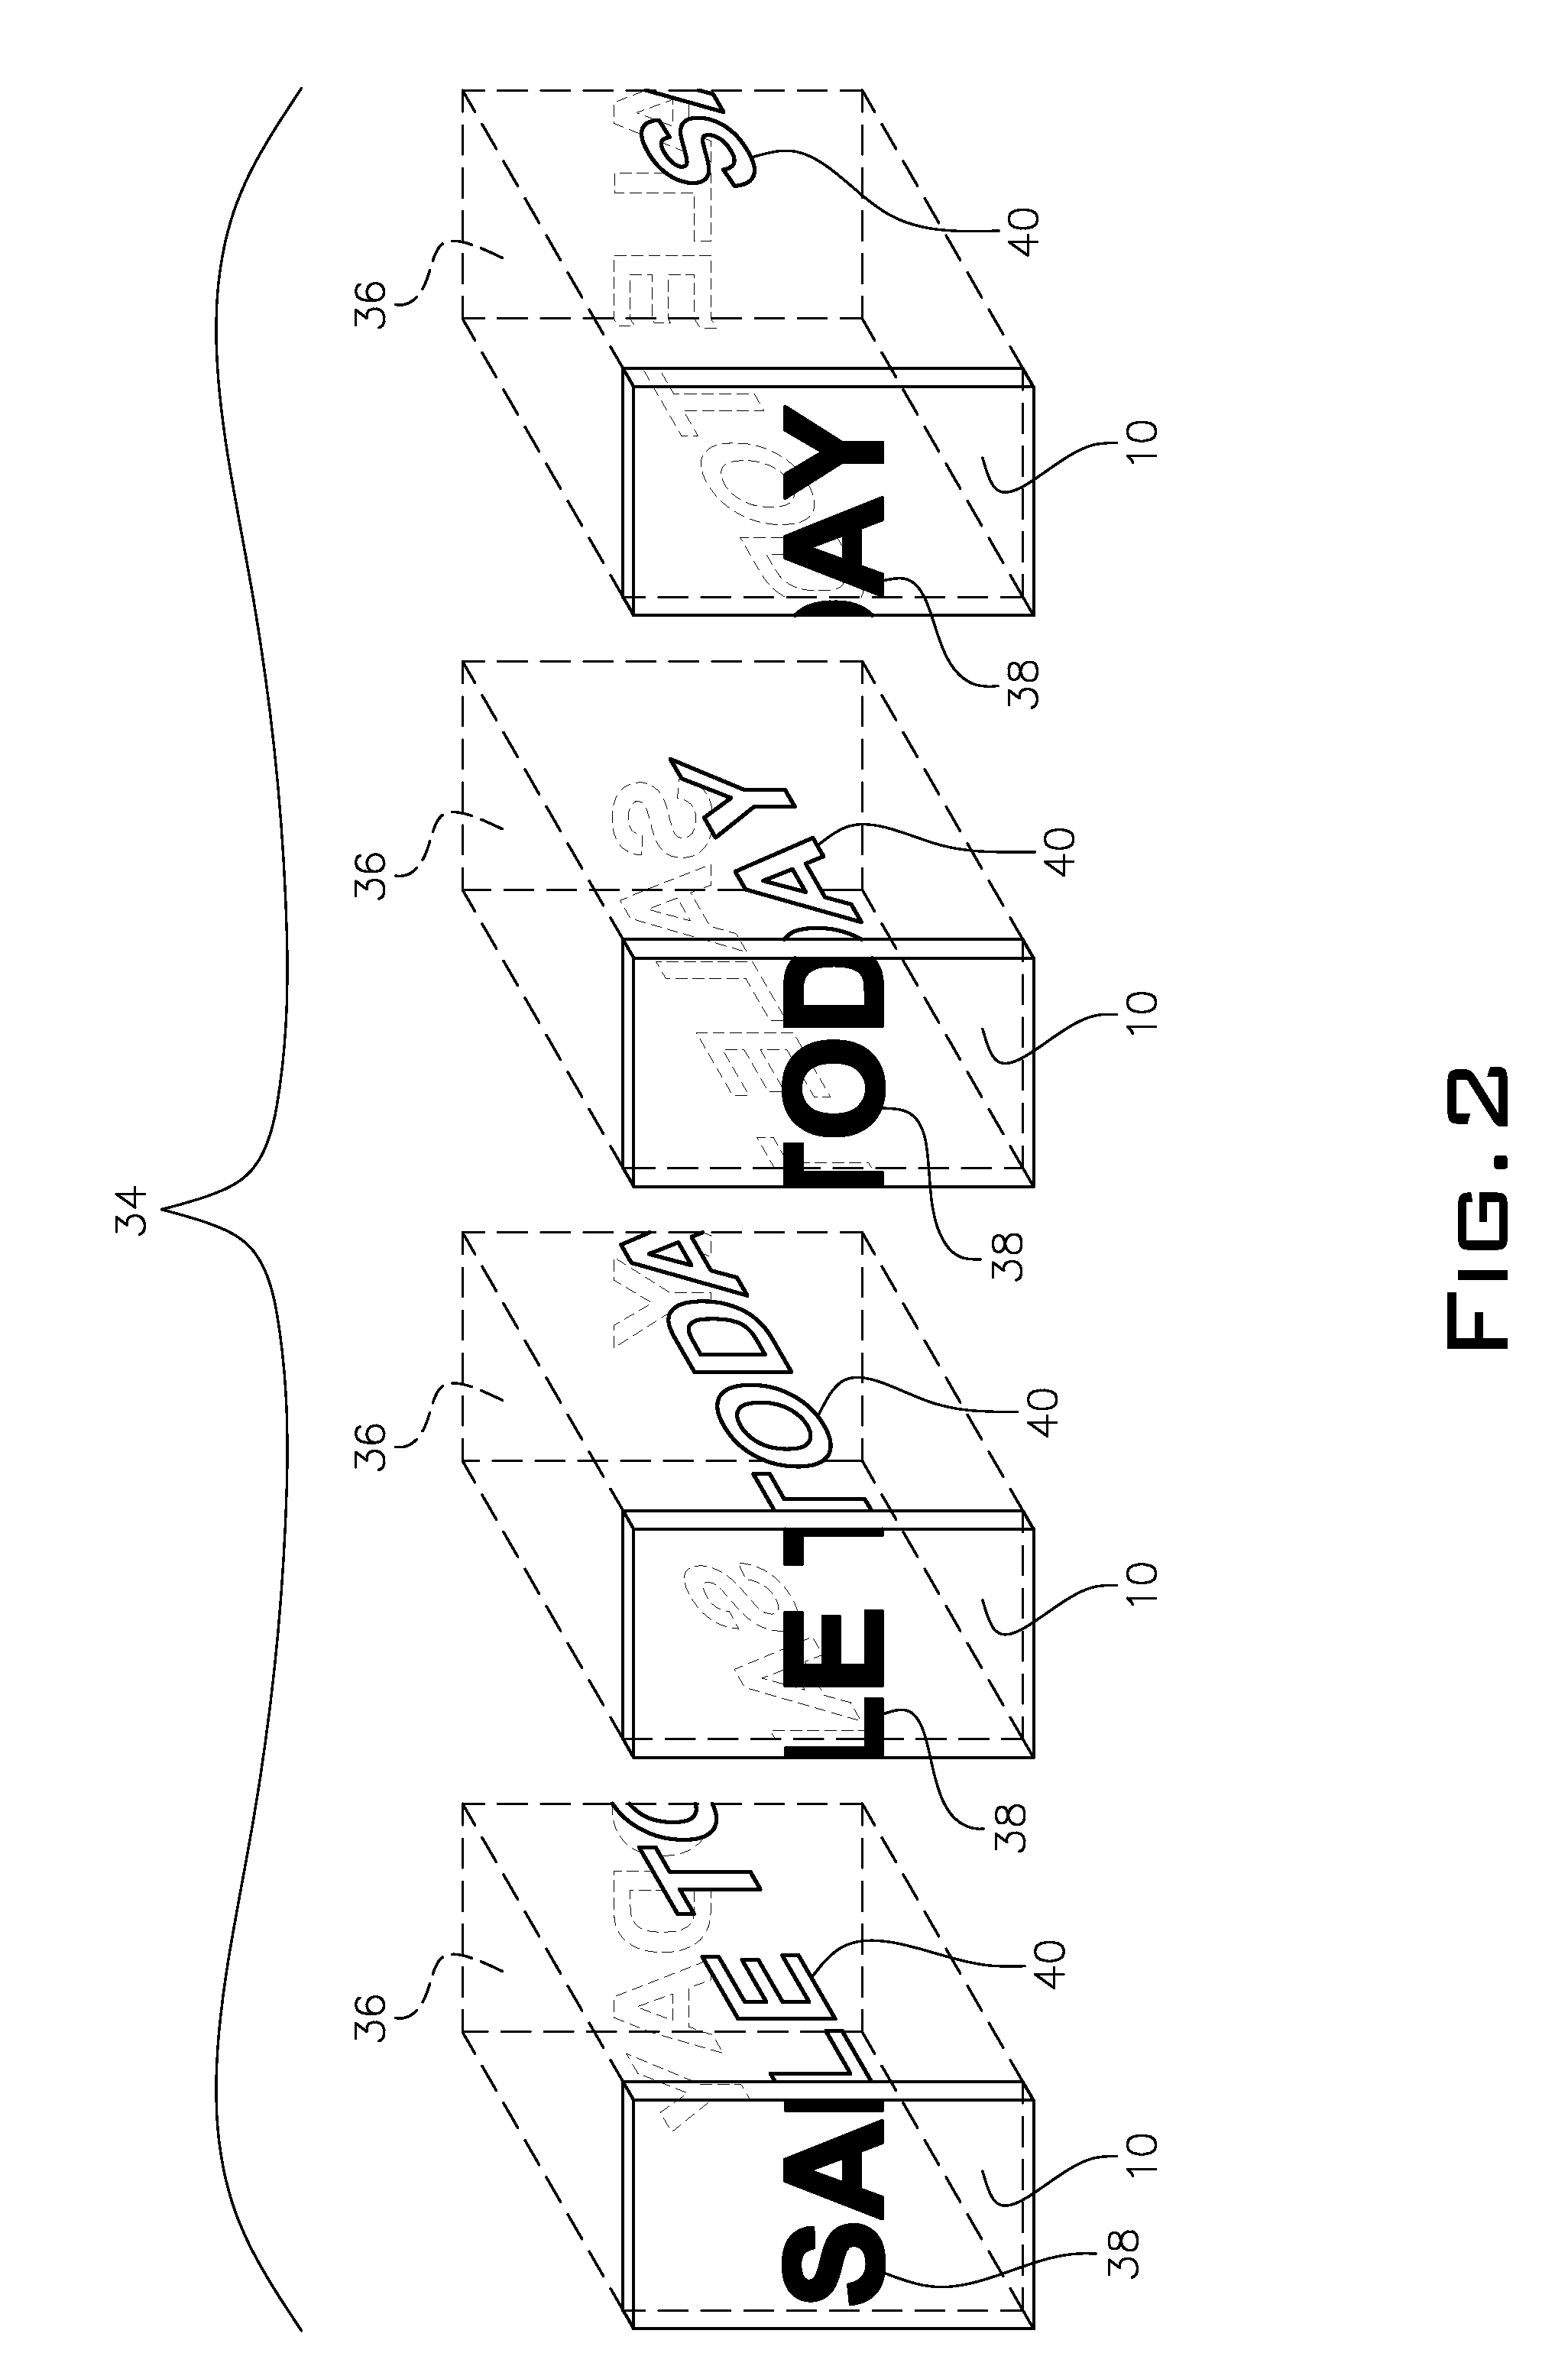 Modular electronic sign and method of assigning a unique identifier to common modules of said sign